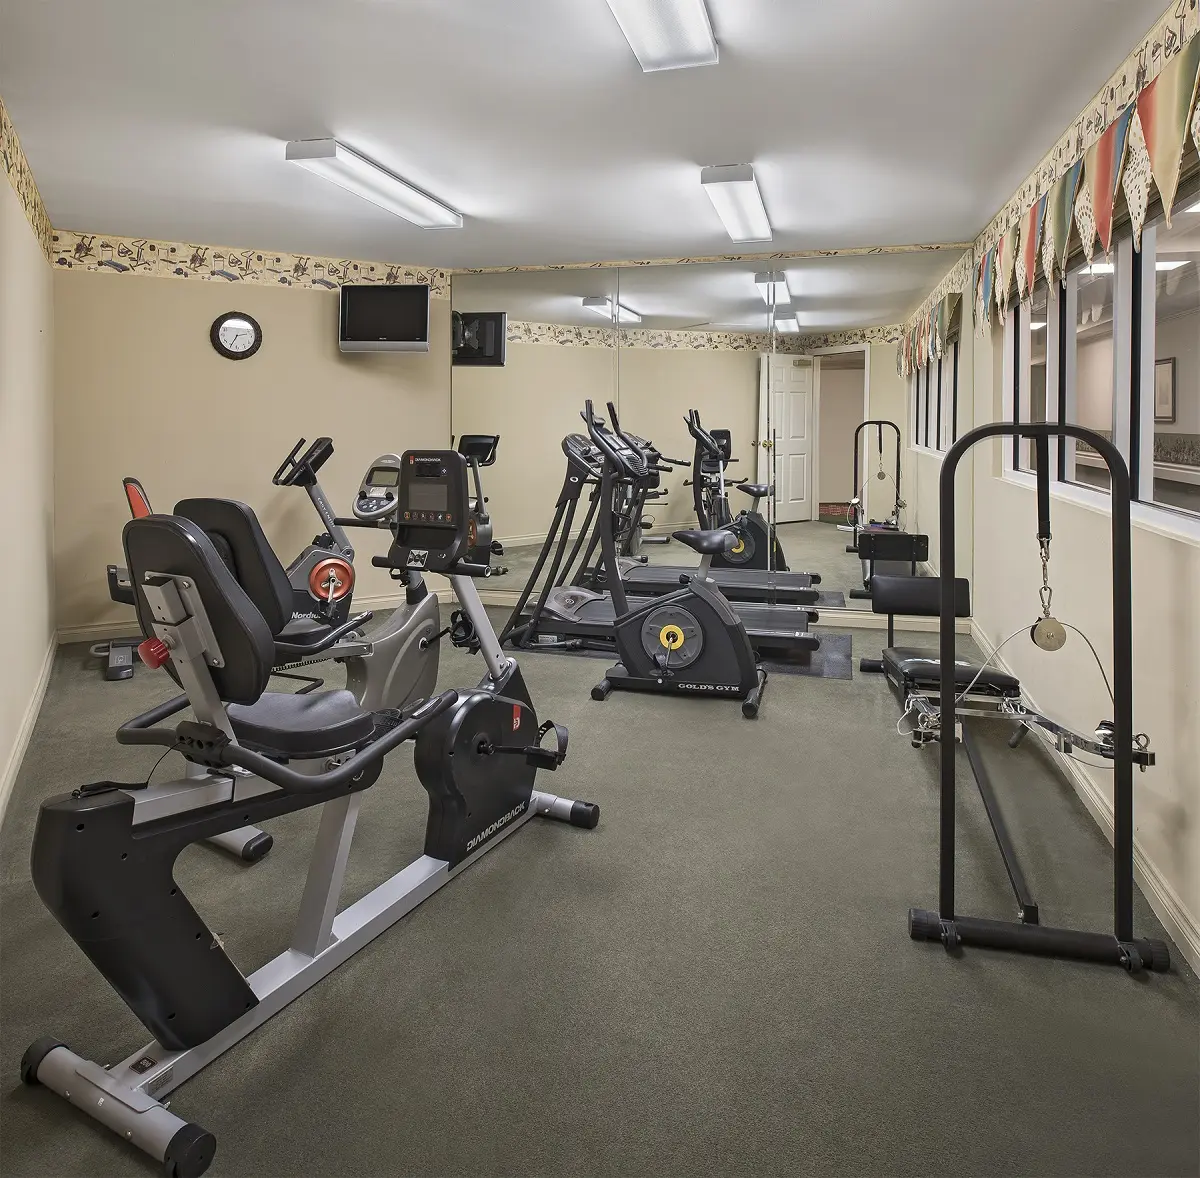 Exercise room with equipment at assisted living facility in North Sterling Heights, MI